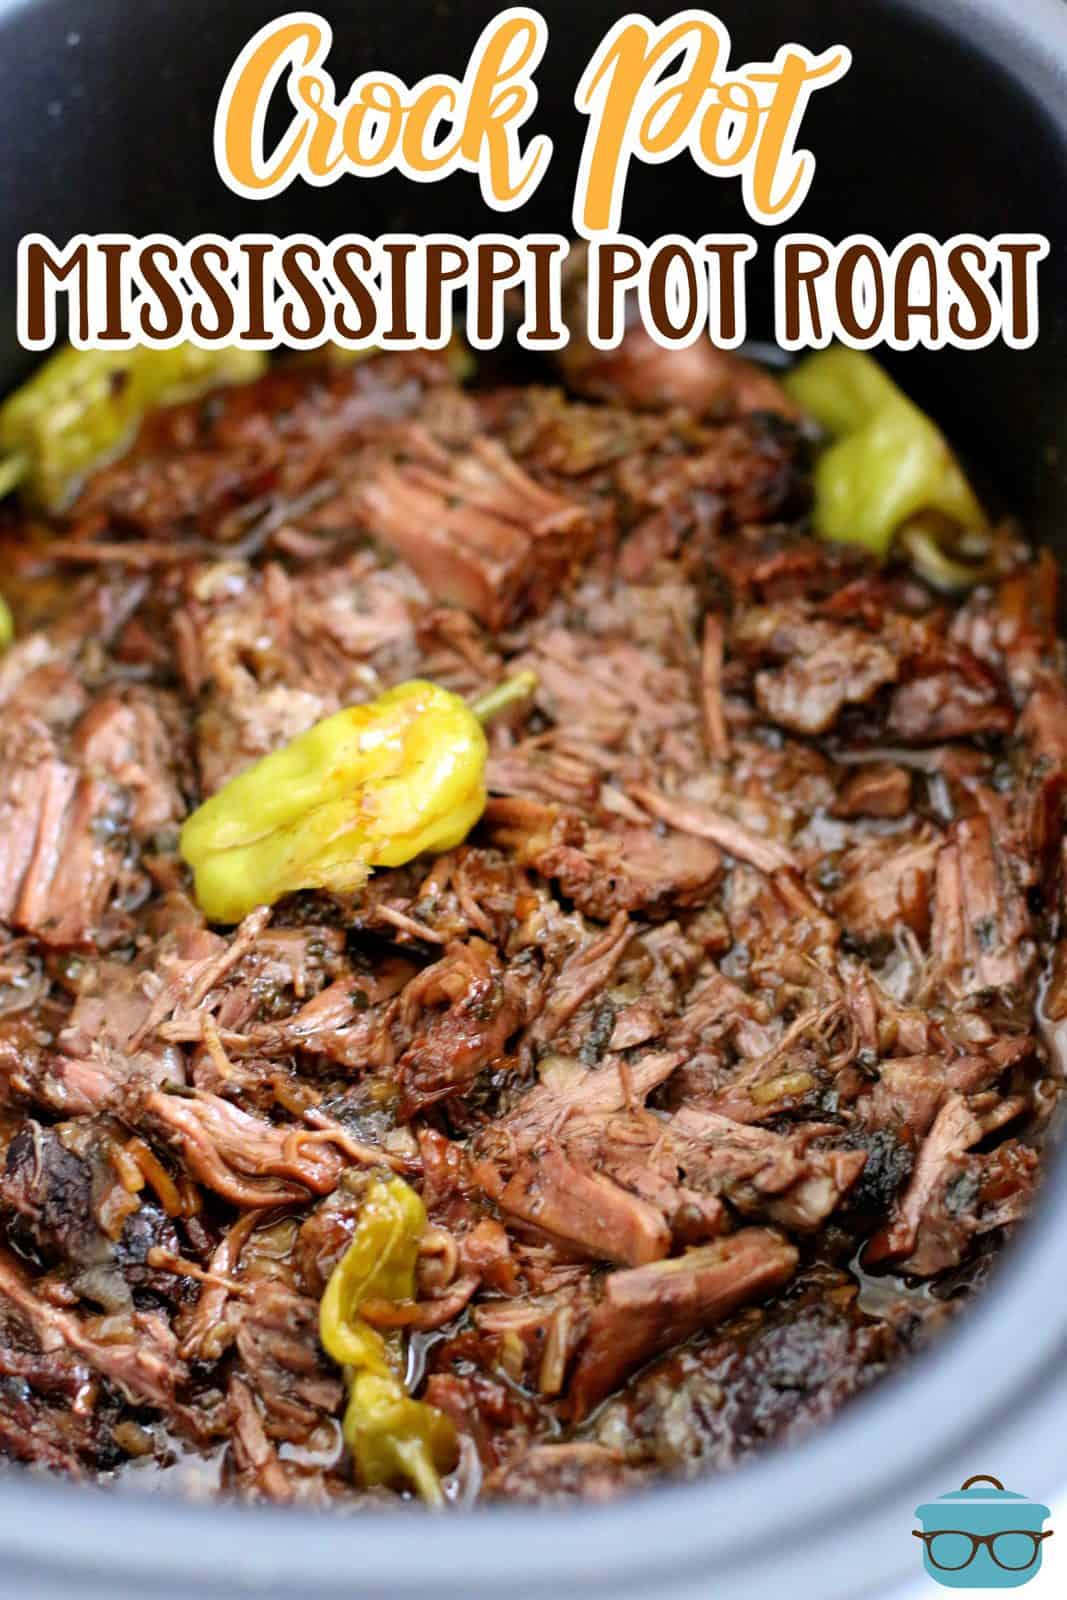 shredded cooked  chuck roast with peperoncini peppers shown in an oval slow cooker.